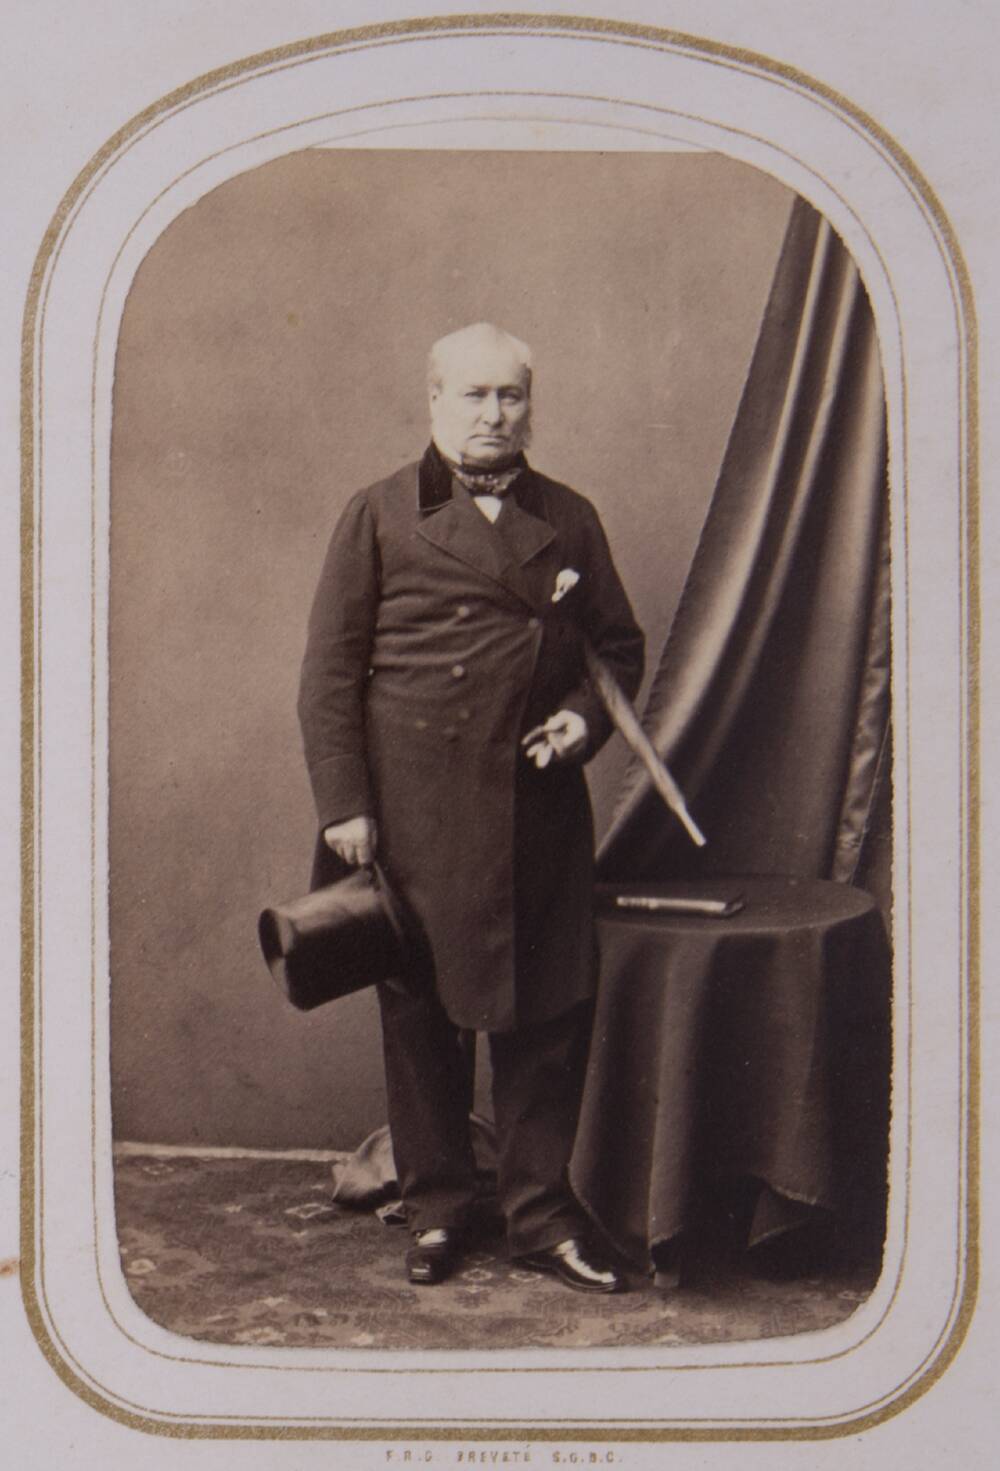 A sepia photograph of an older Victorian-looking man, standing in a photography studio. He wears a long dark overcoat and carries a top hat in one hand, with a walking cane tucked under the other arm. He stands beside a small round table covered in a black cloth.